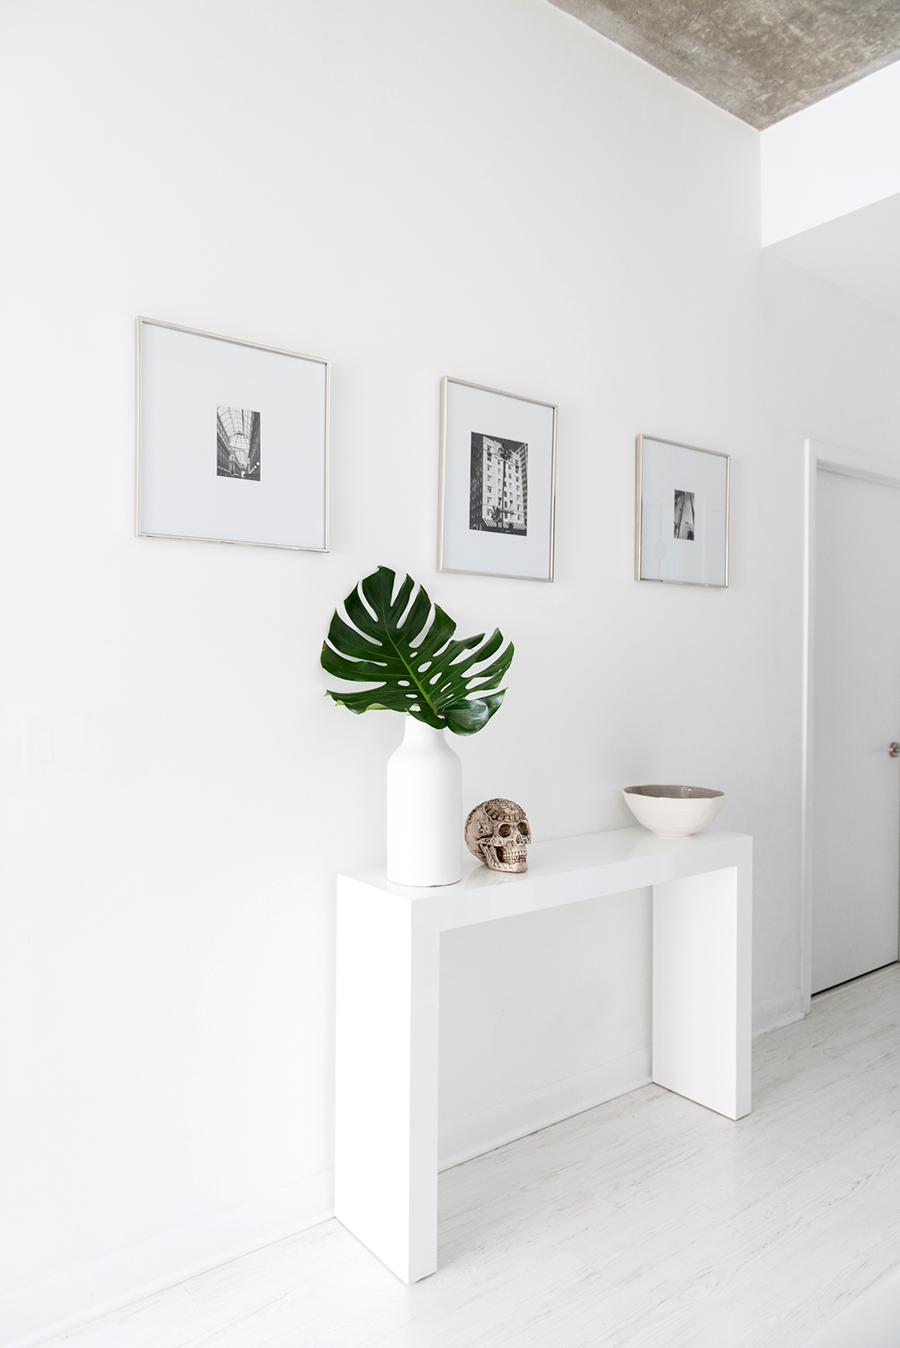 home office reveal blogger kayla seah not your standard pretty stylish chic white decor black  clean simple modern small space workspace desk inspiration fashion style work shelving structube west elm